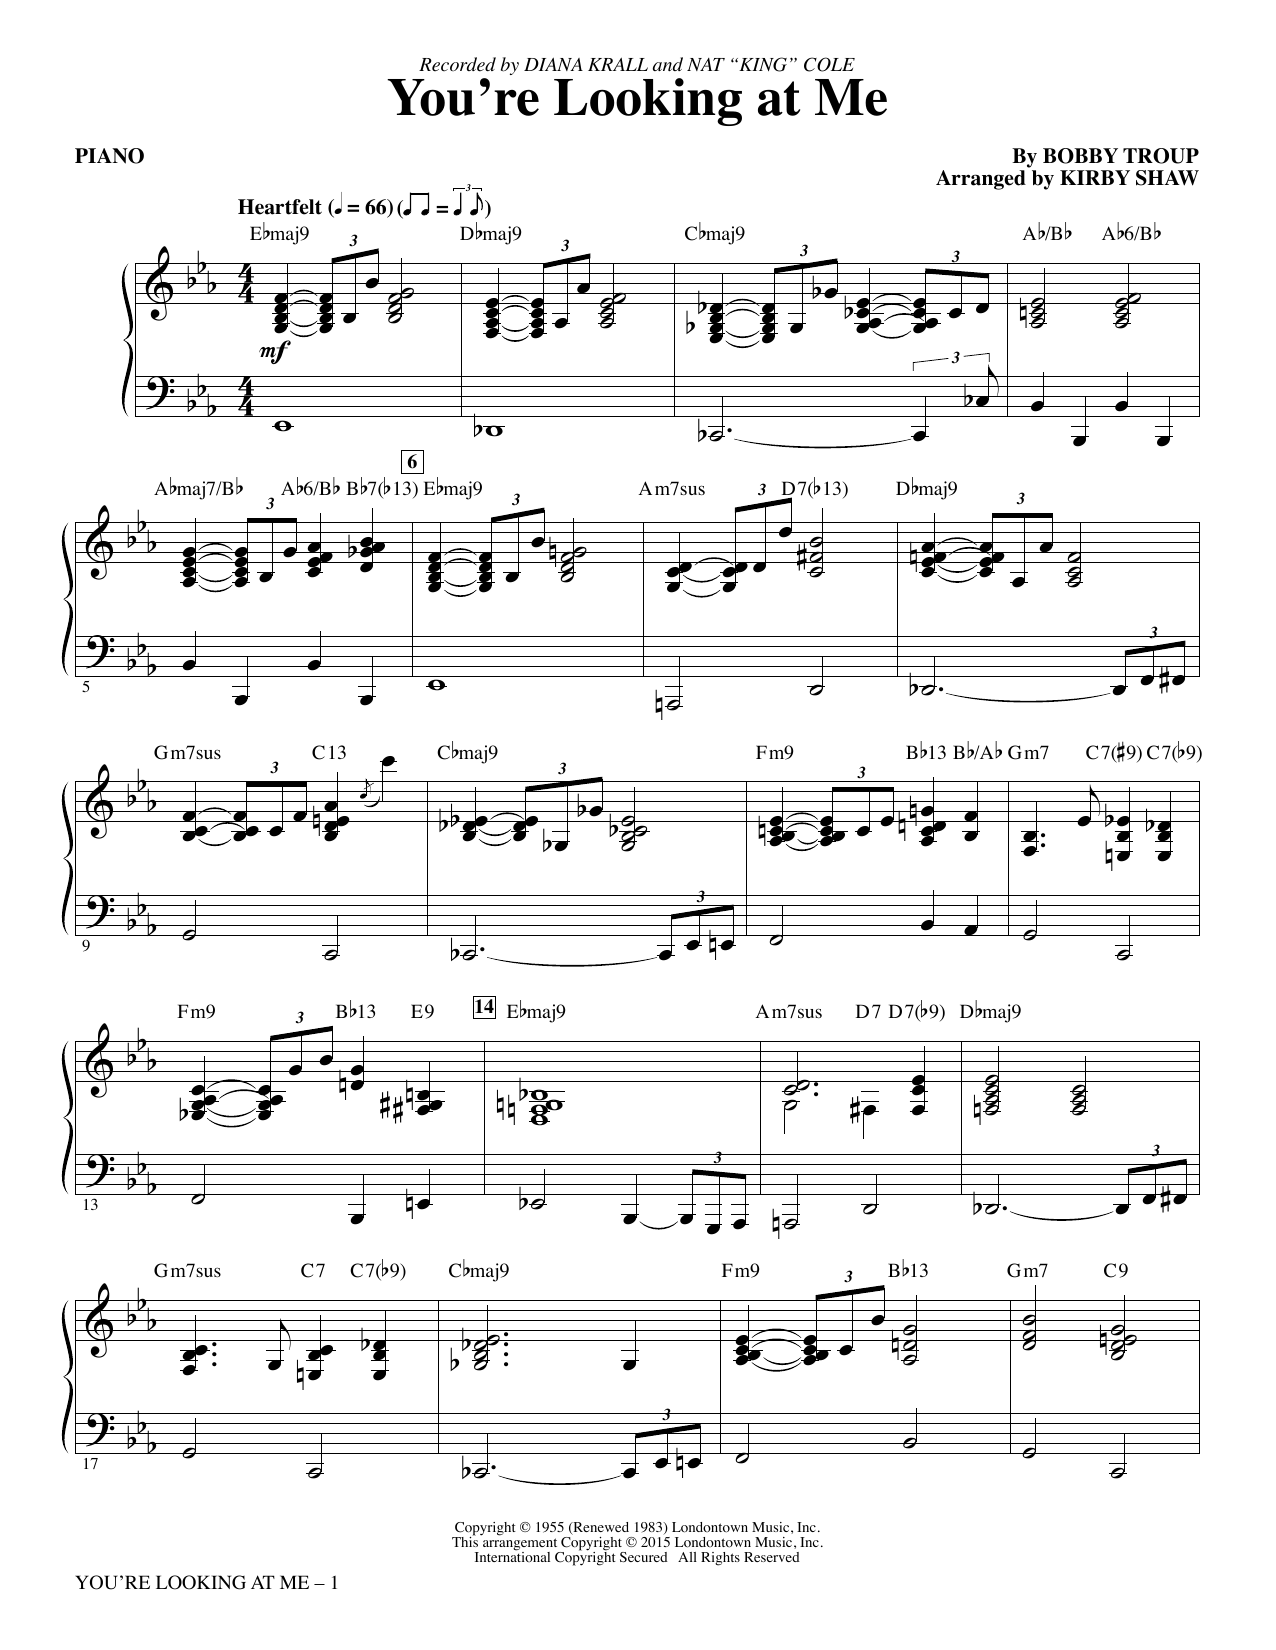 Kirby Shaw You're Looking At Me - Piano sheet music notes and chords. Download Printable PDF.